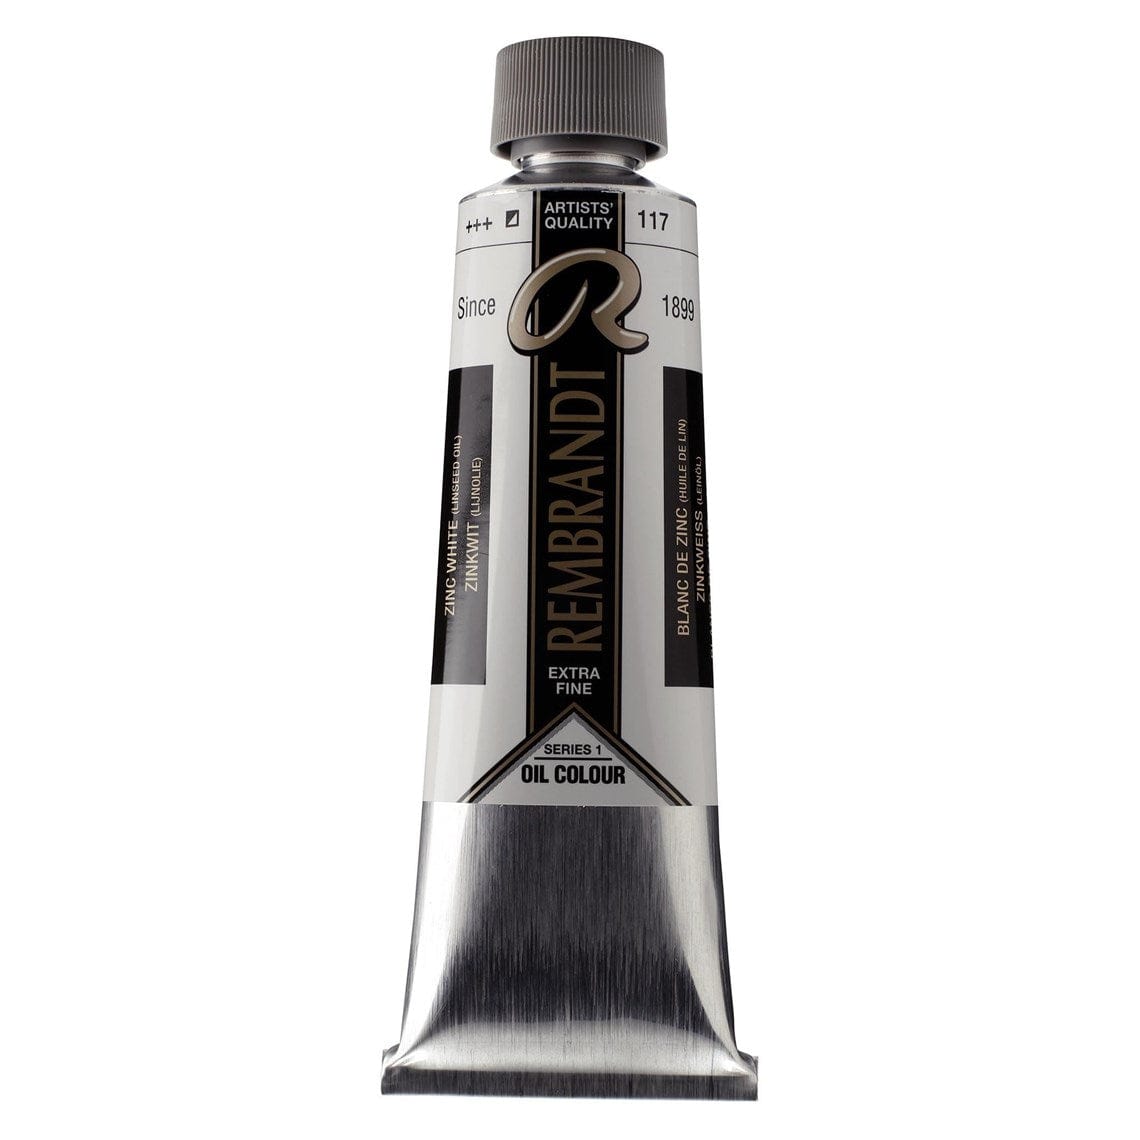 Rembrandt Oliemaling 150ml Zinc White (Linseed oil)